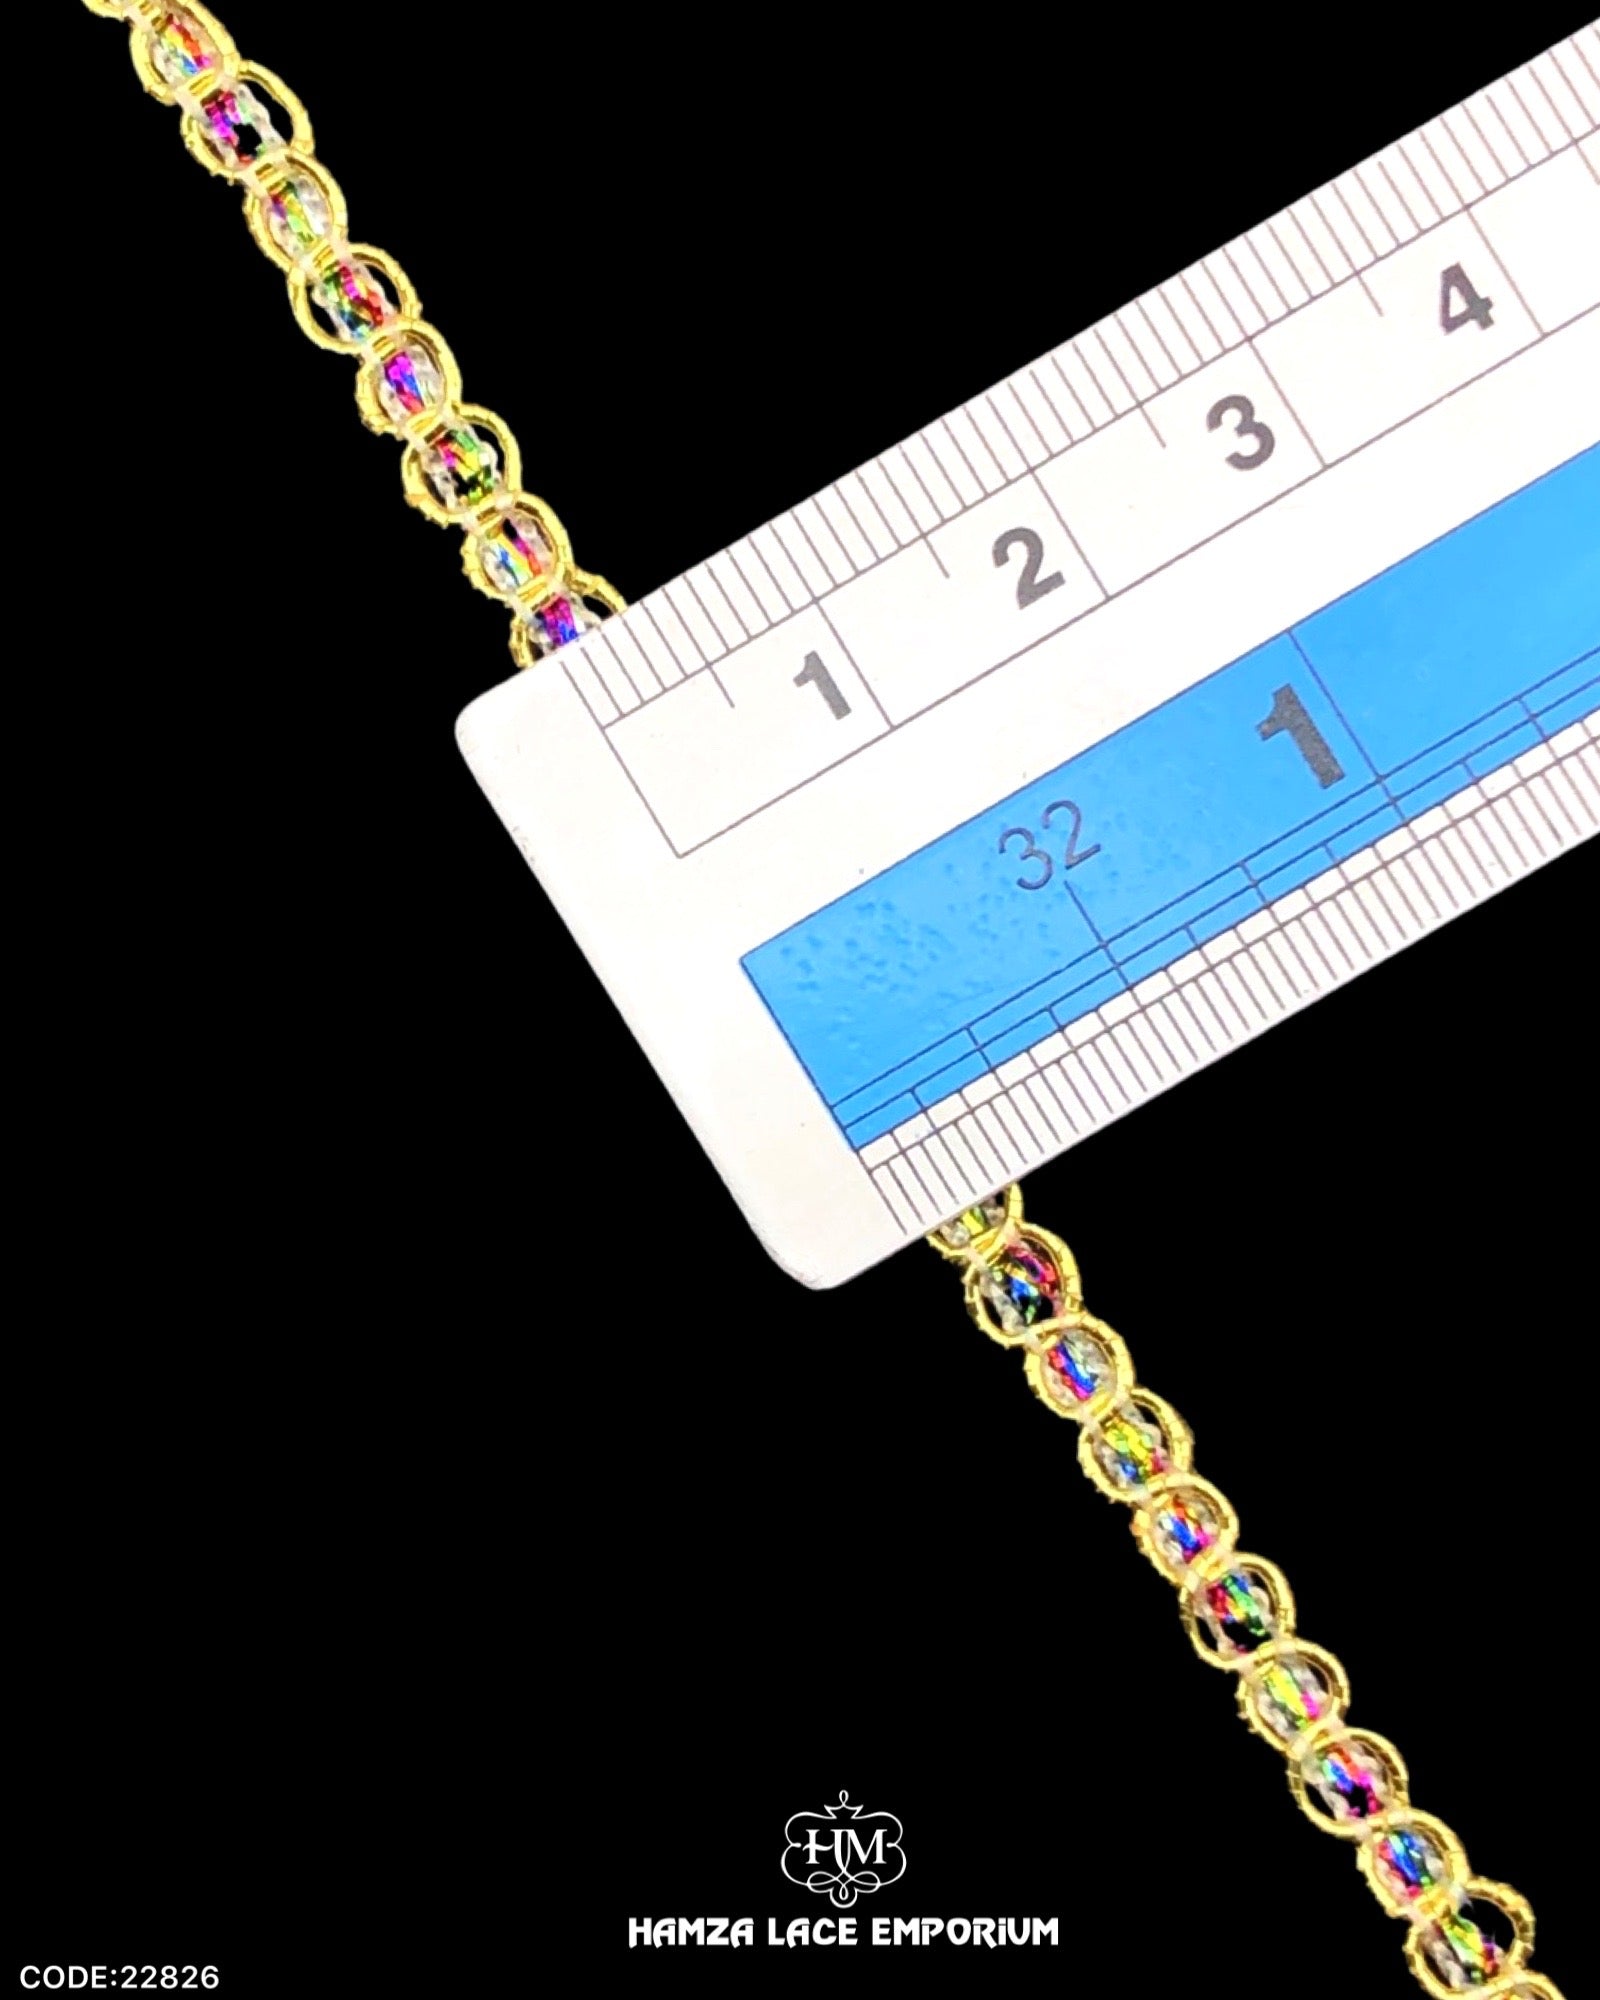 Size of the 'Center Filling Tilla Dori 22826' is displayed with the help of a ruler 